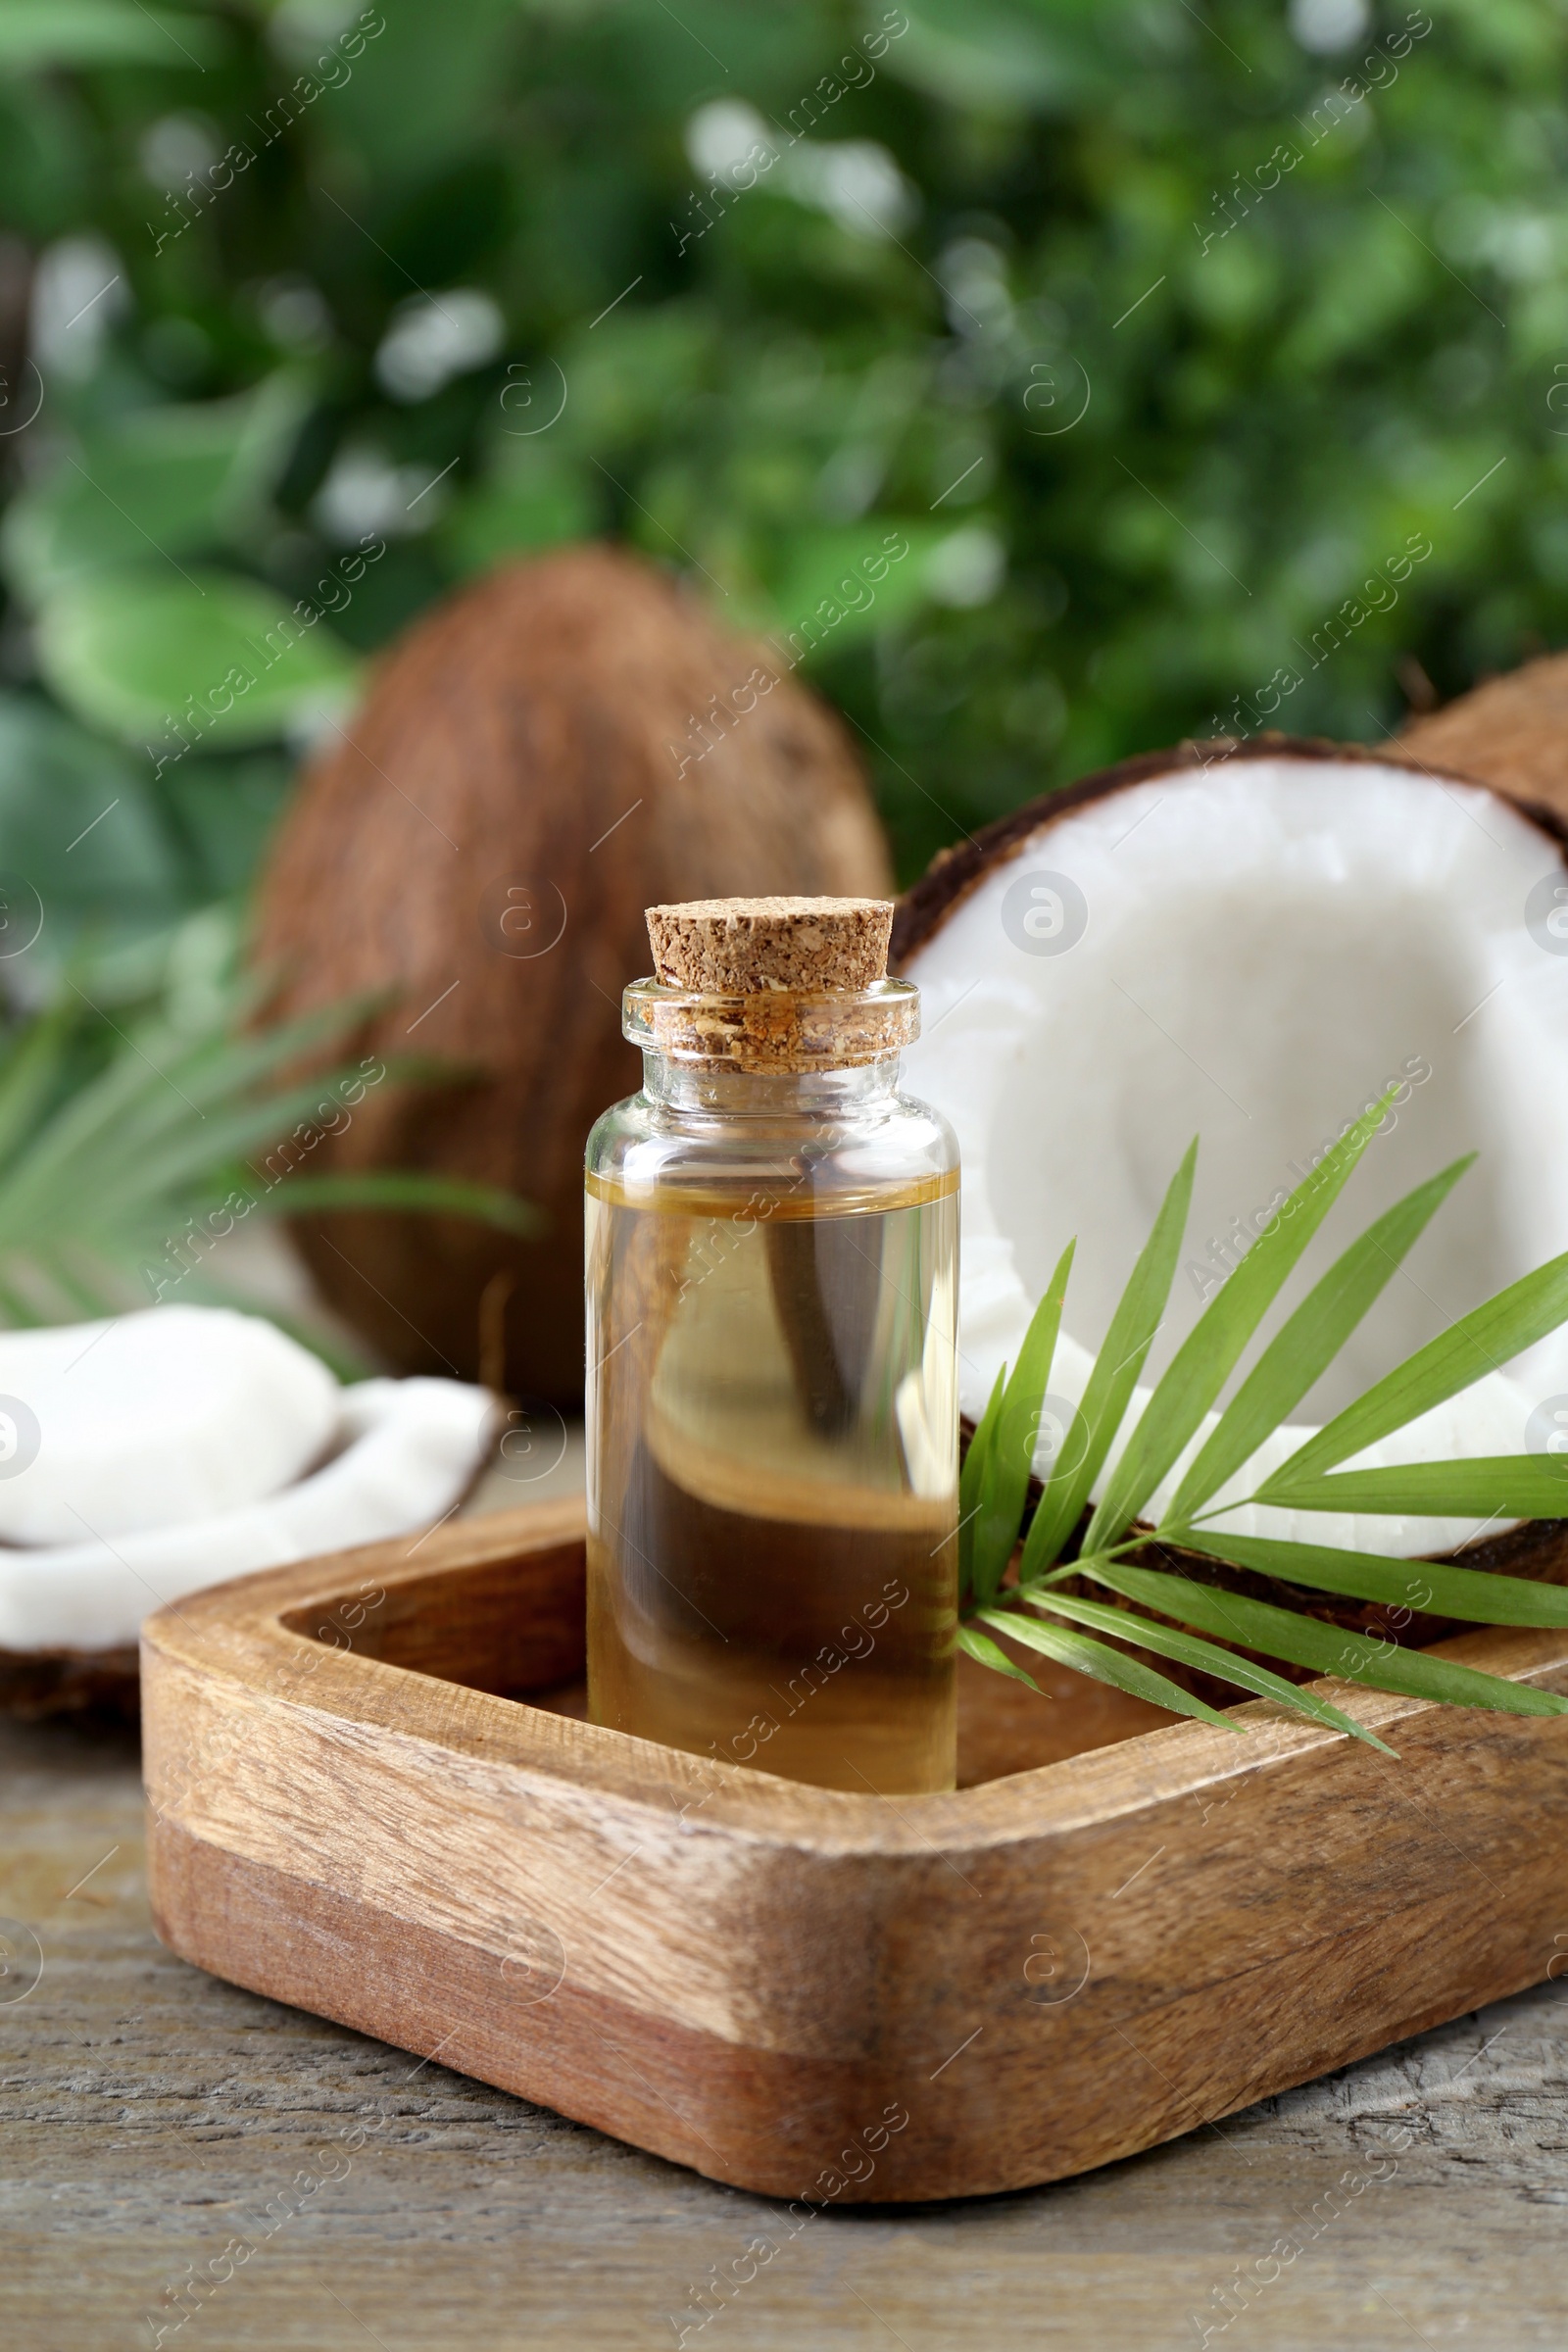 Photo of Bottle of organic coconut cooking oil, fresh fruits and leaf on wooden table